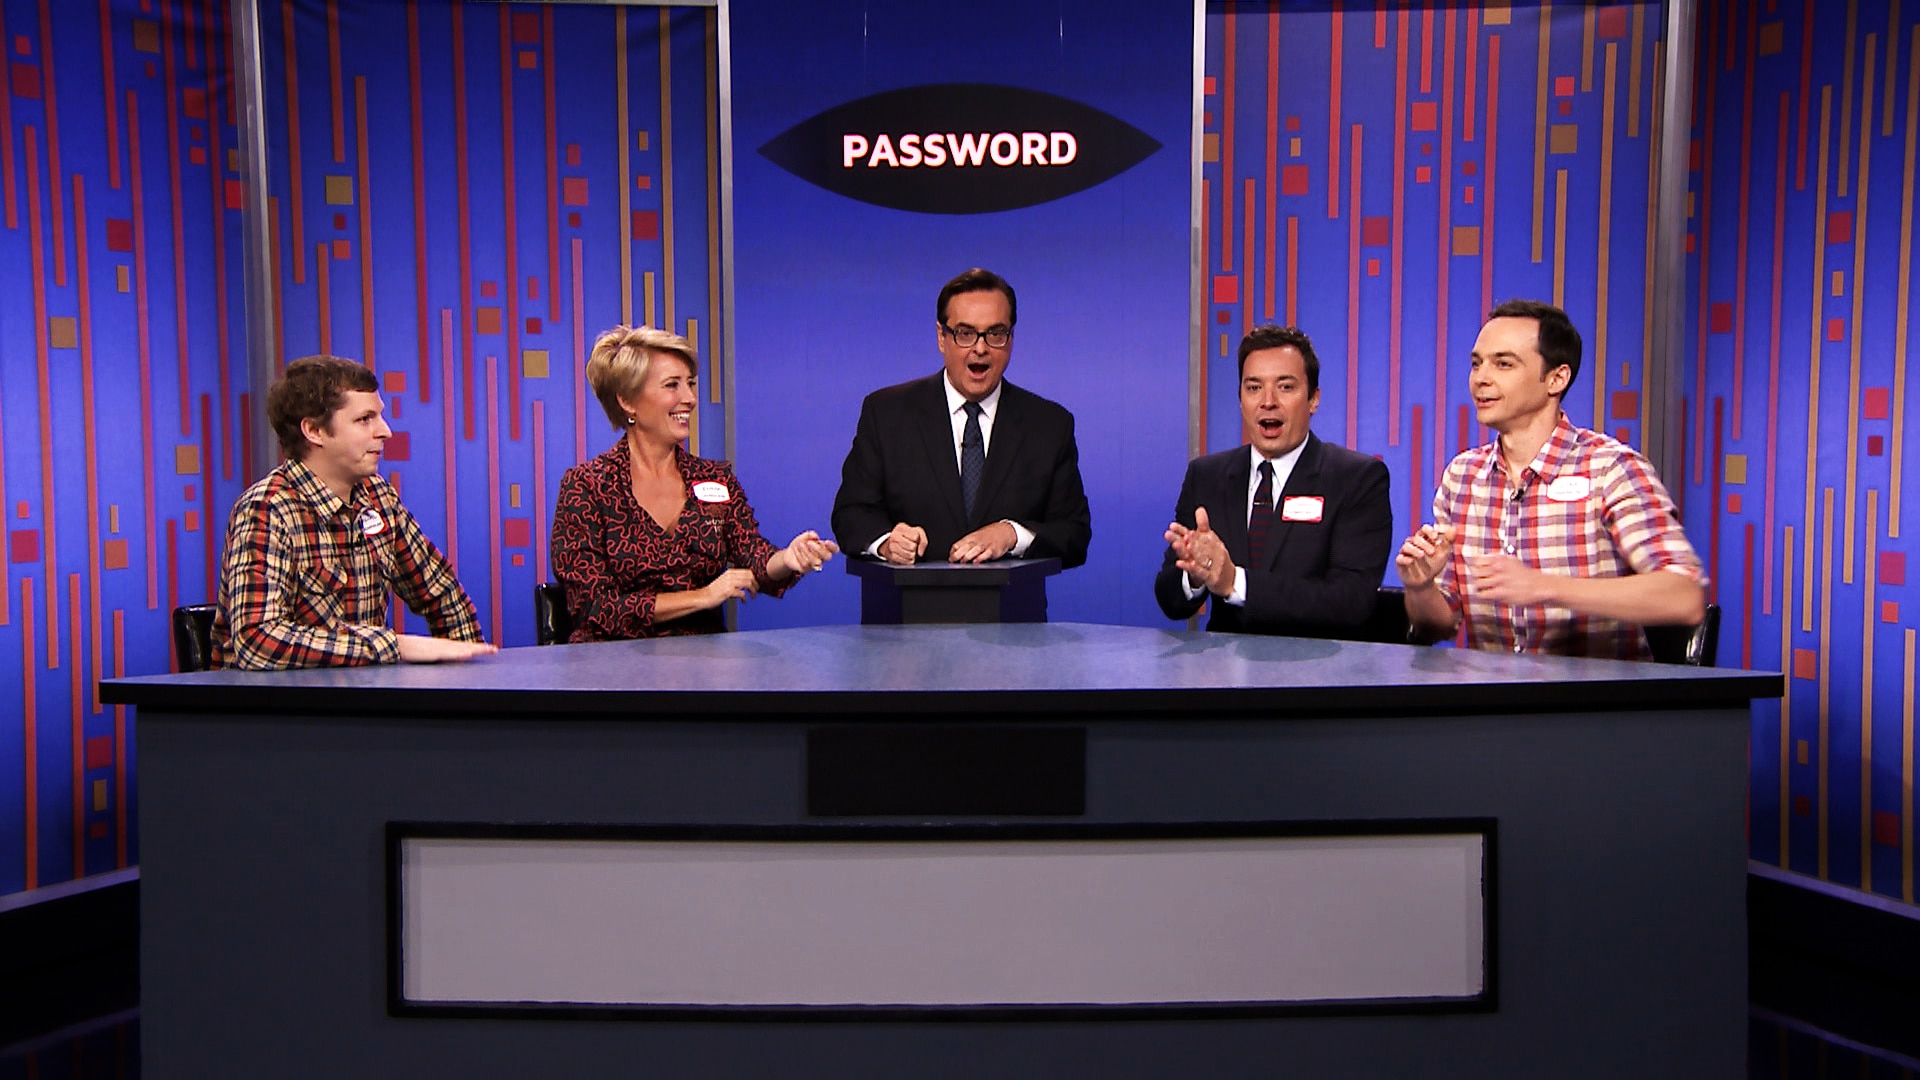 Watch The Tonight Show Starring Jimmy Fallon Highlight Password with